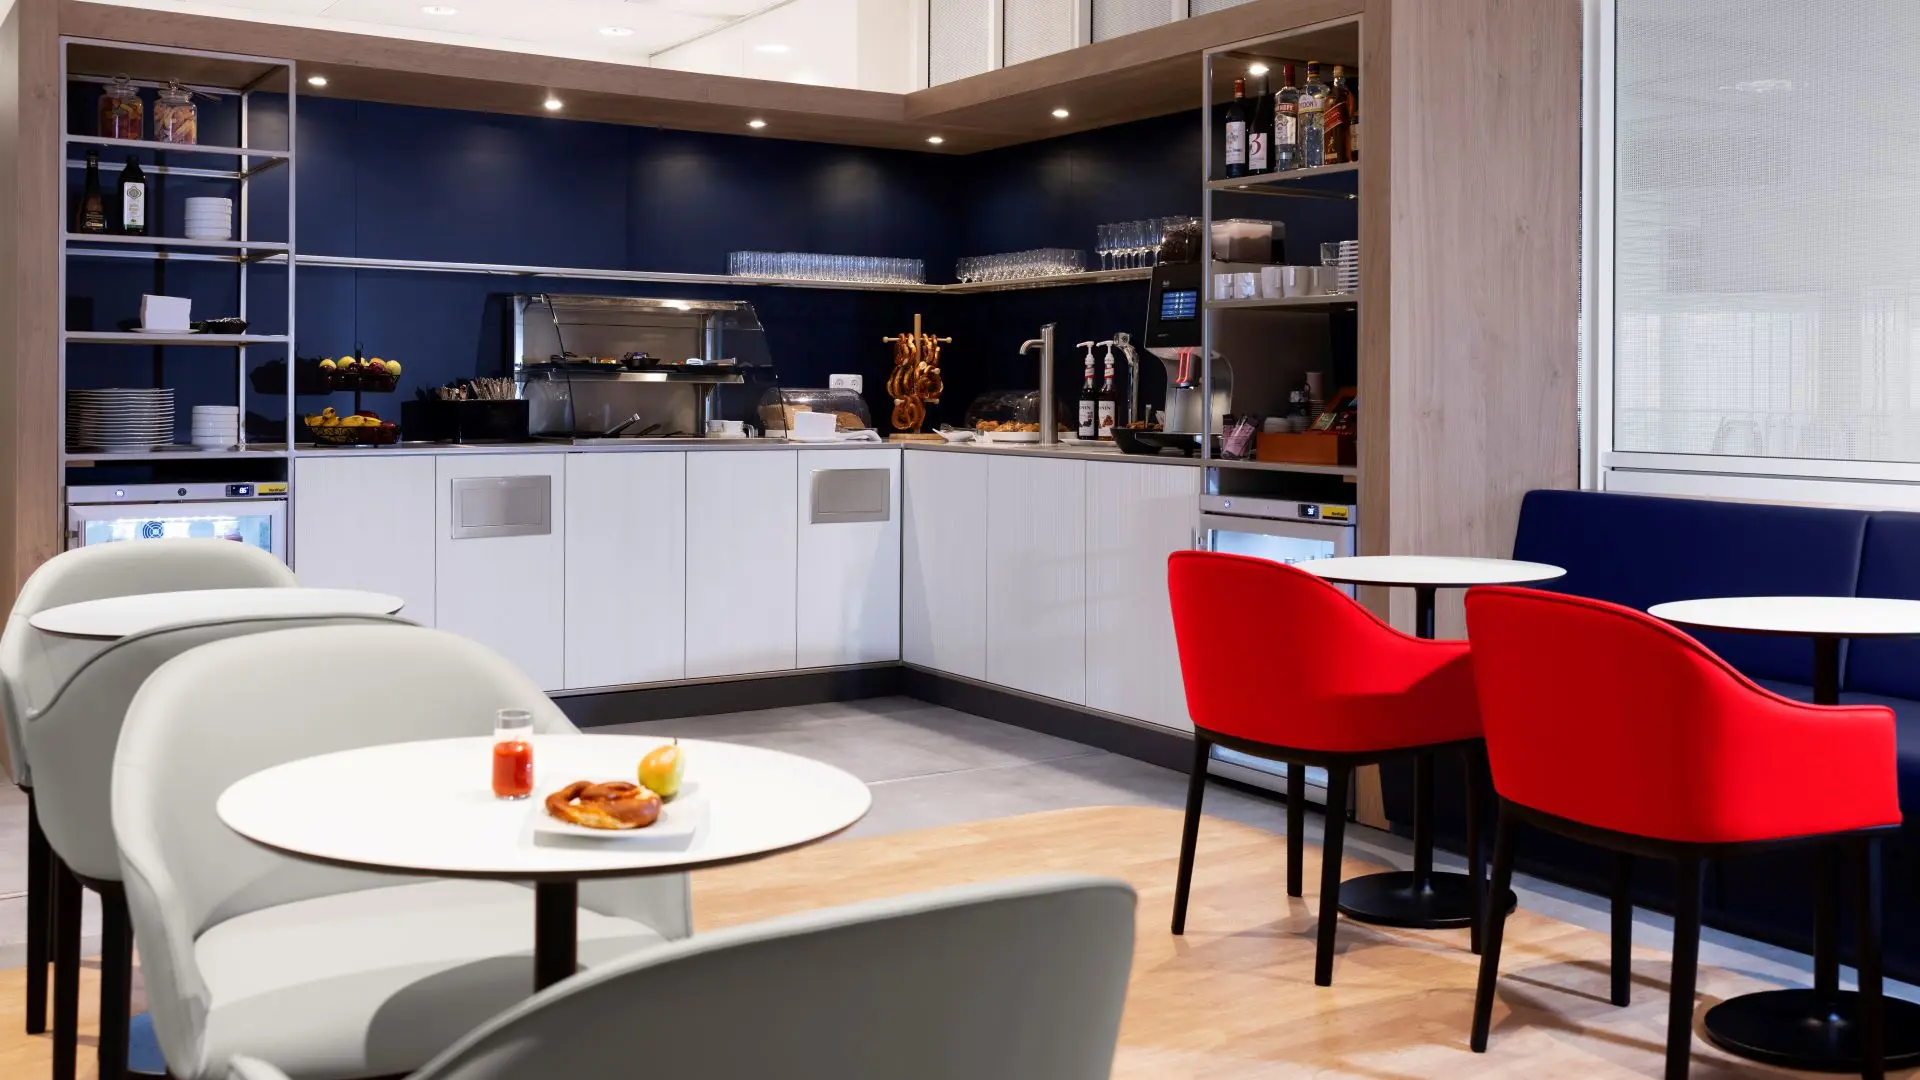 Airlines News - Air France redesigns Munich lounge